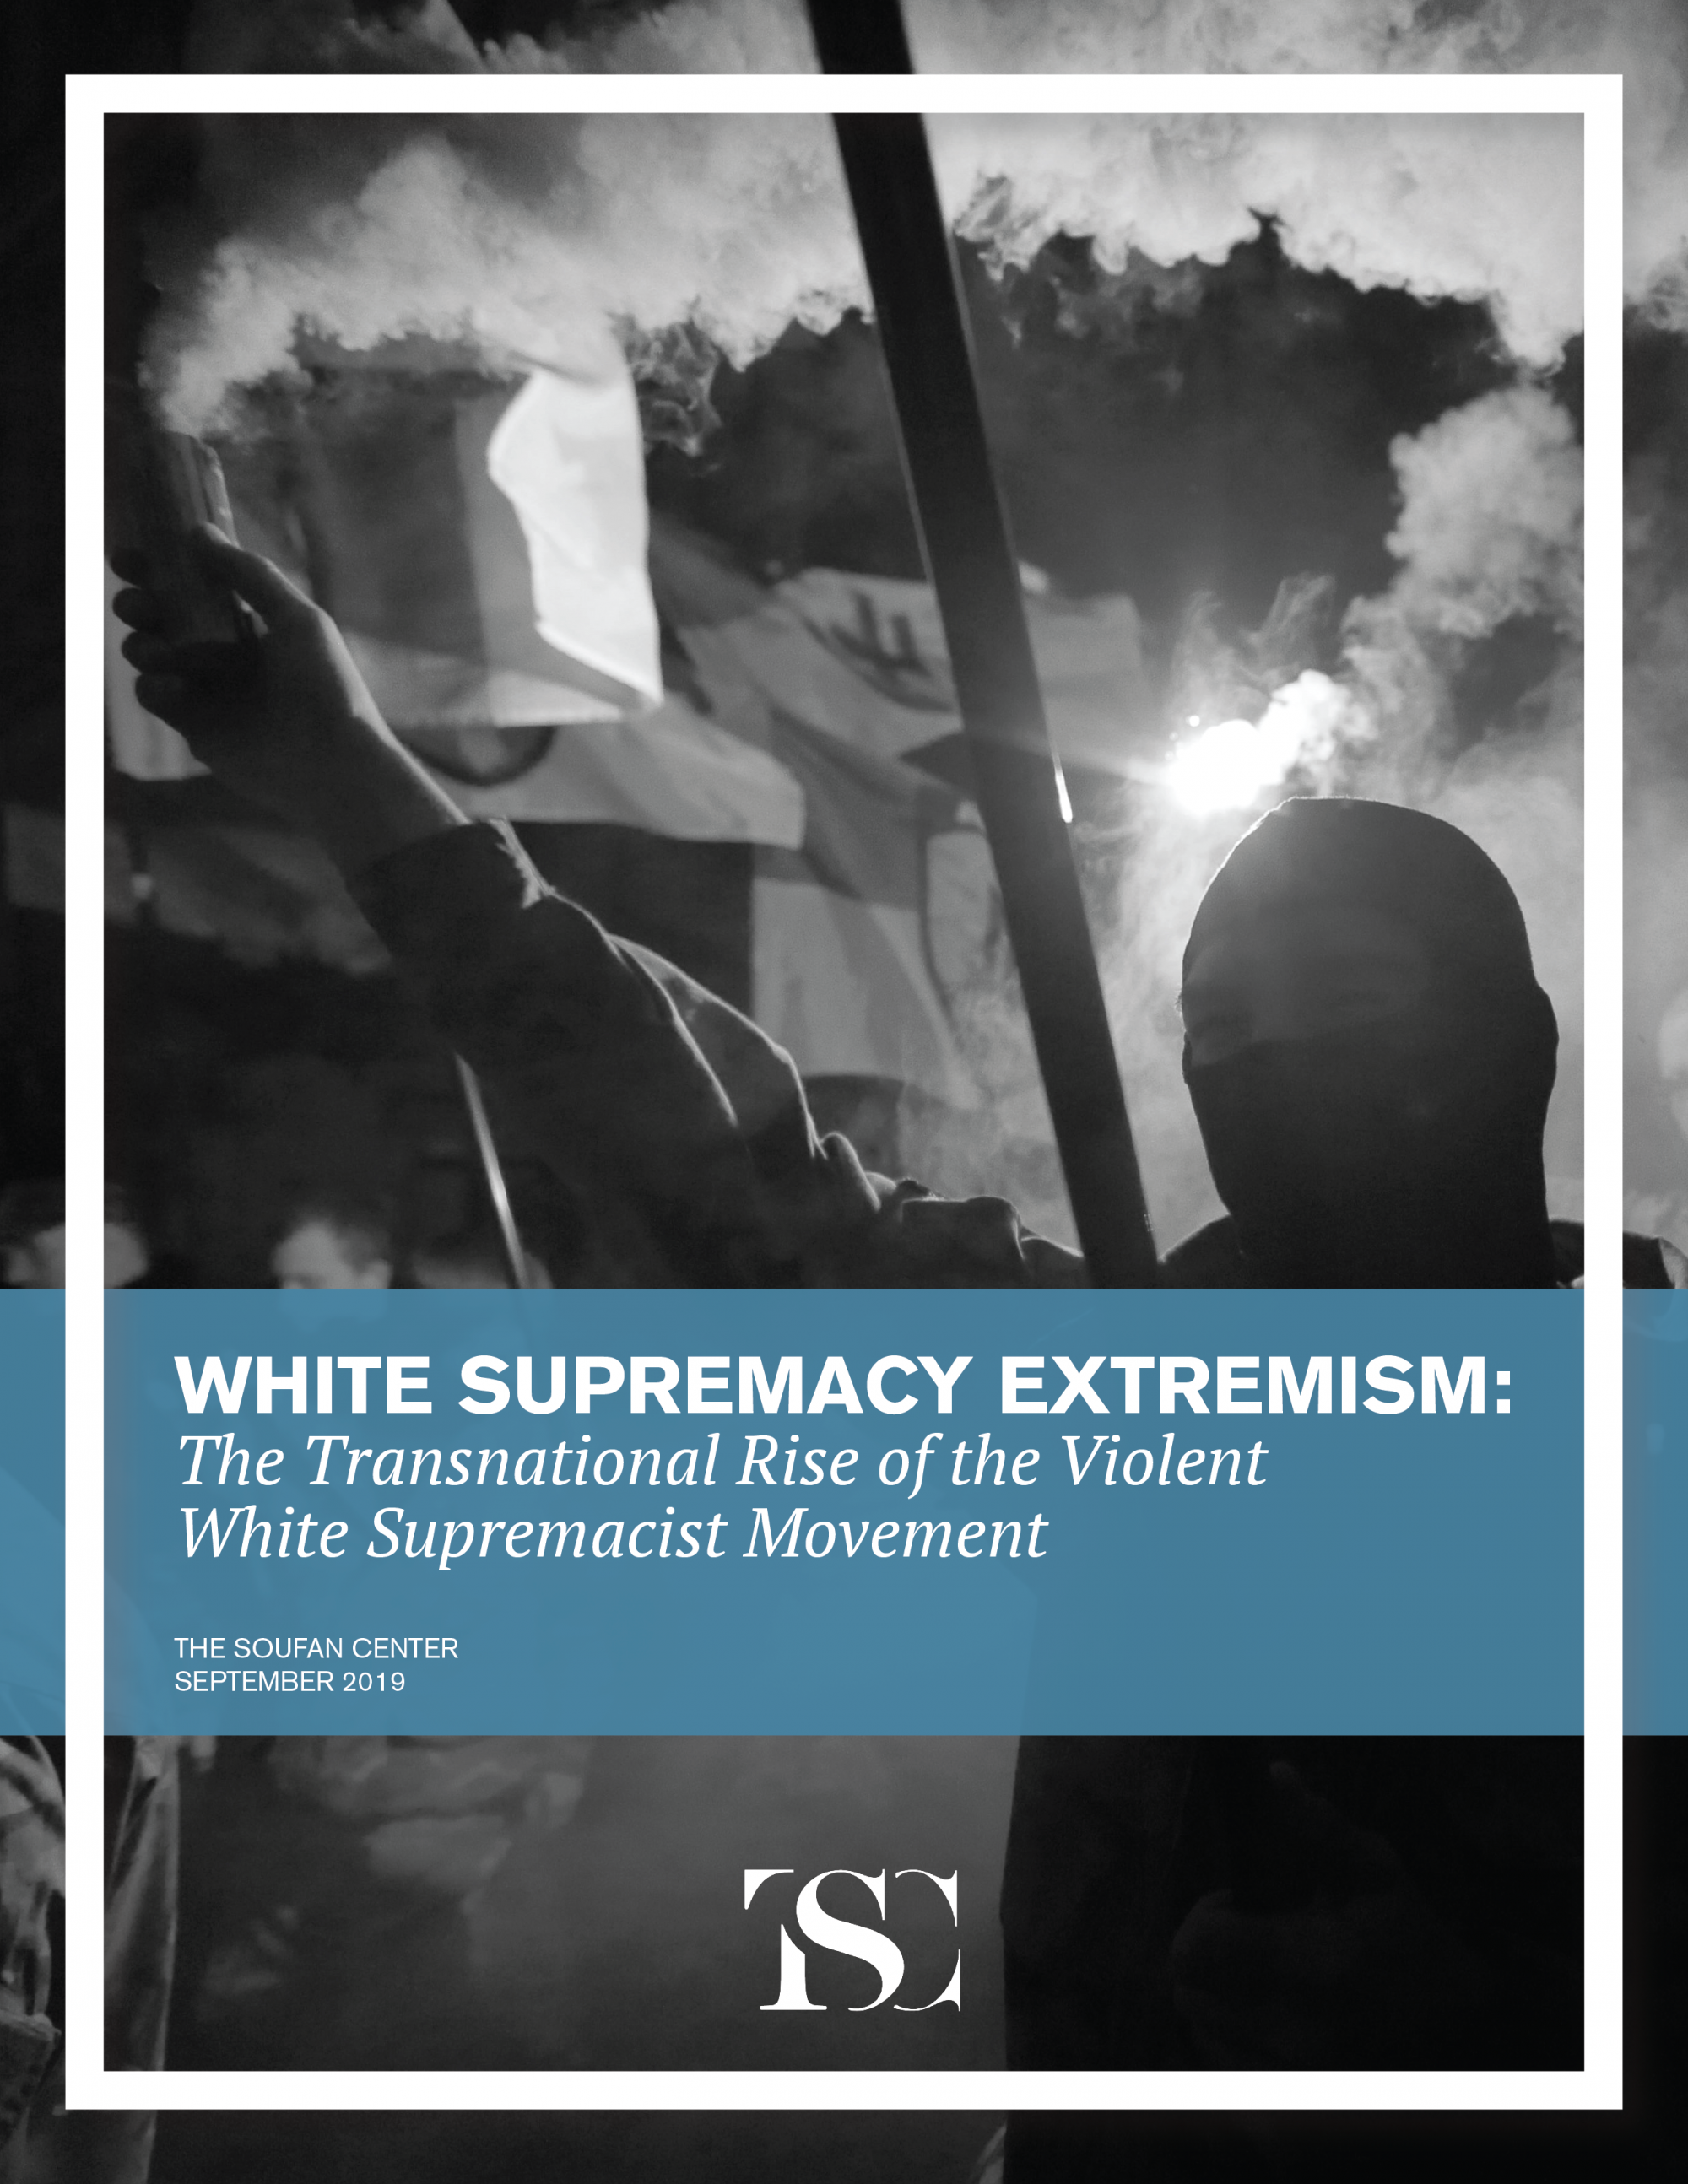 Transnational White Supremacist Militancy Thriving in South Africa